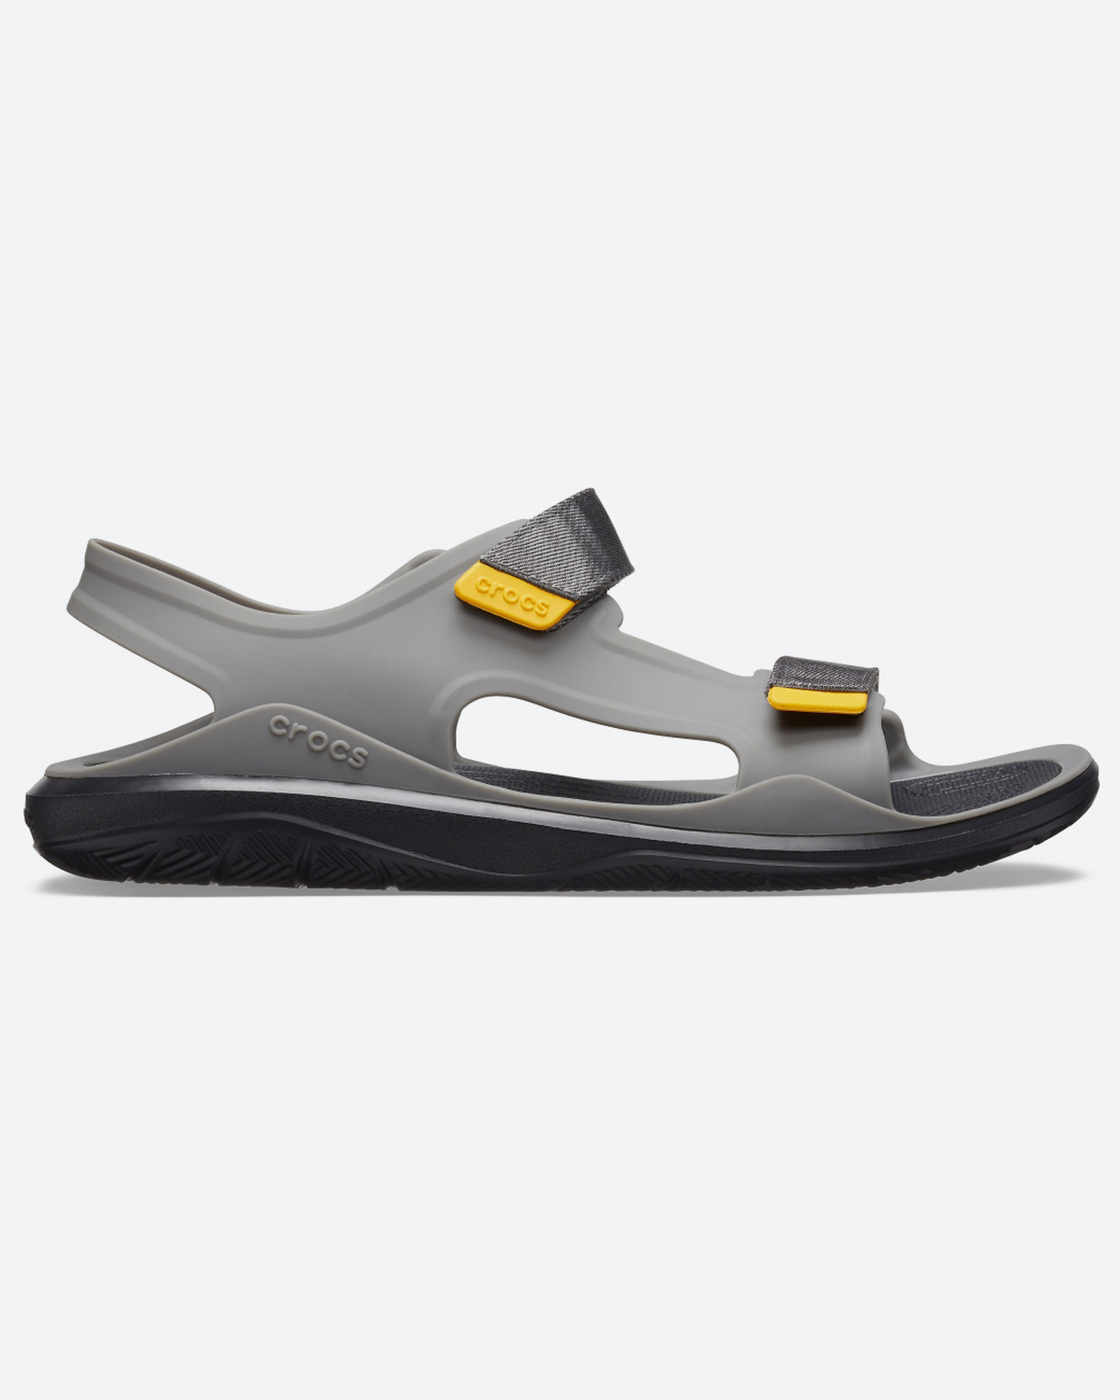 swiftwater expedition sandal